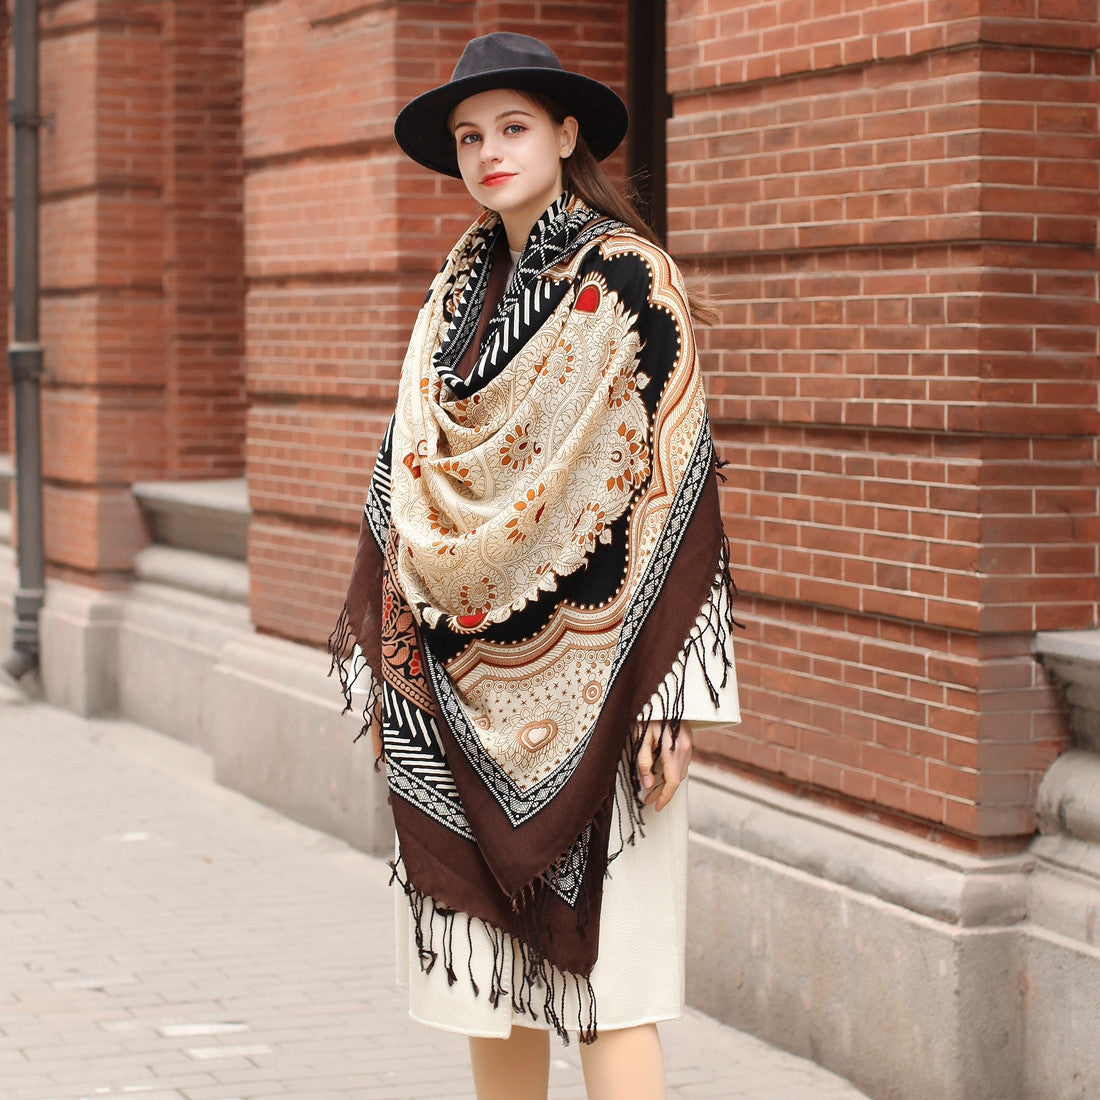 Oversized Women's Wool Cape - Multifunctional Ethnic Elegance with Plants and Flowers Pattern in Rich Brown - FlaxLin Eco Textiles